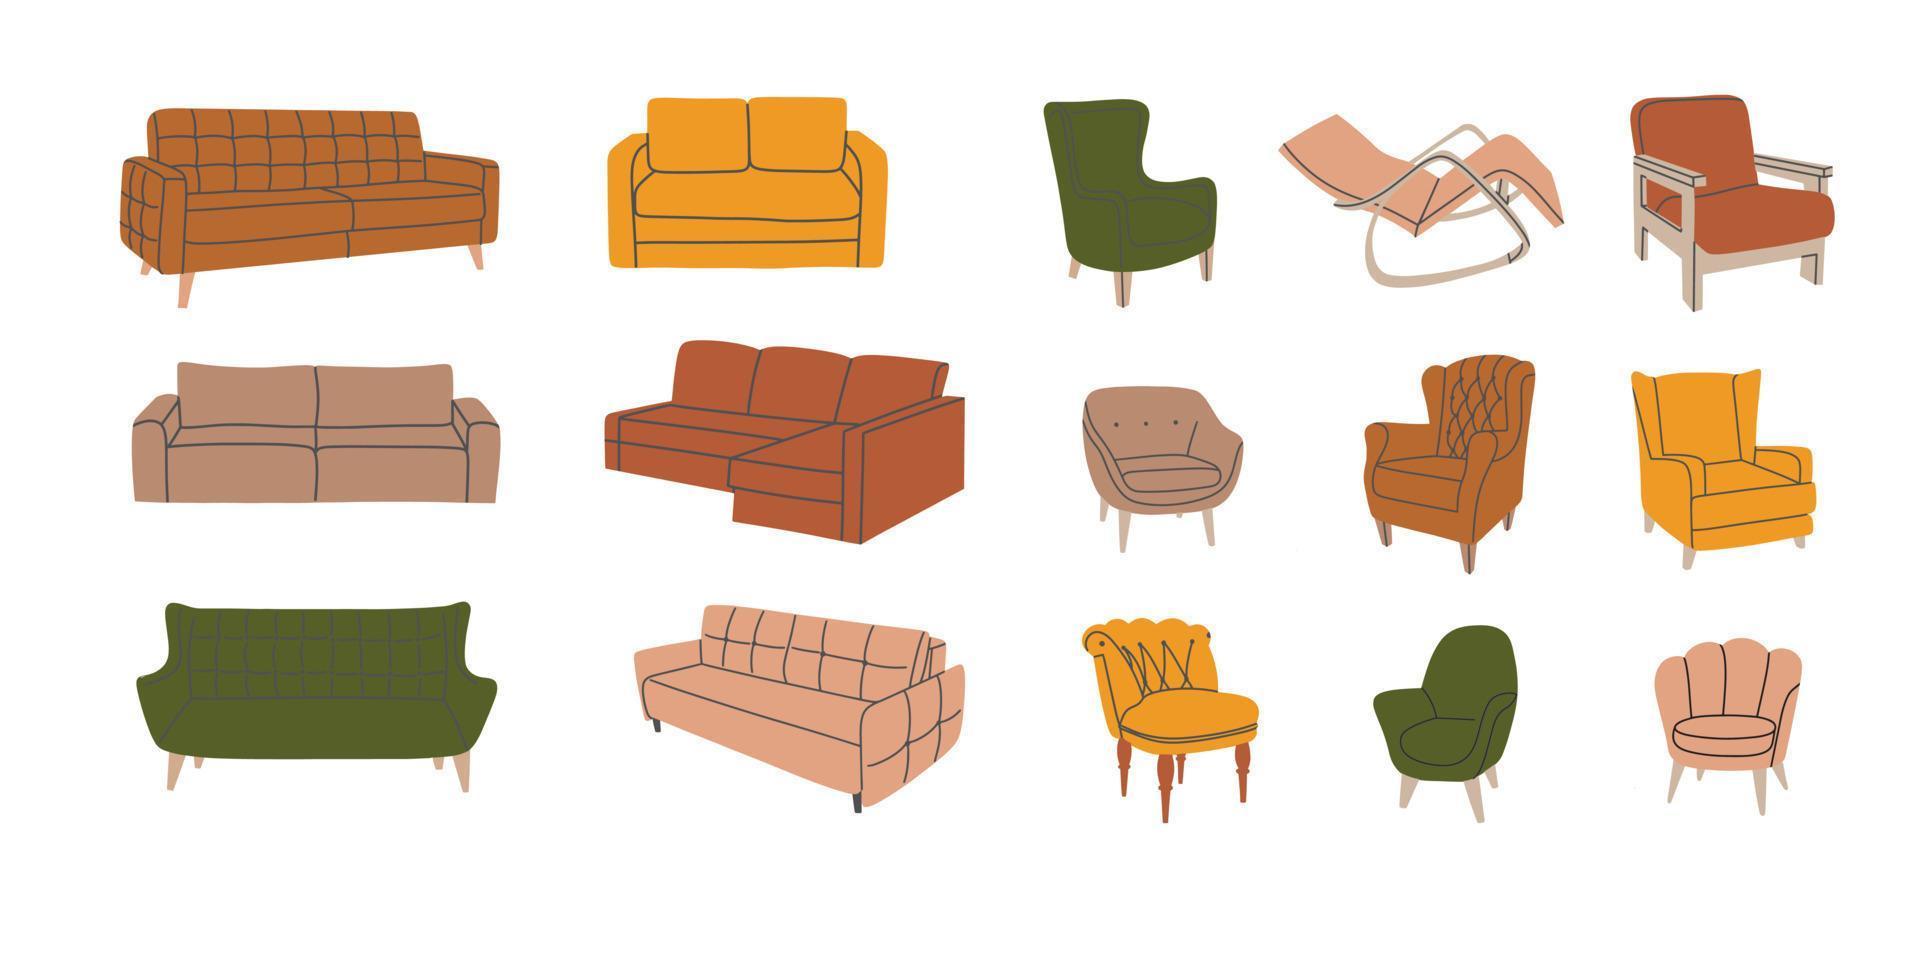 Set of various trendy colorful armchairs and couches. Soft furniture collection for interior design and decoration. Hand drawn vector illustration isolated on white background